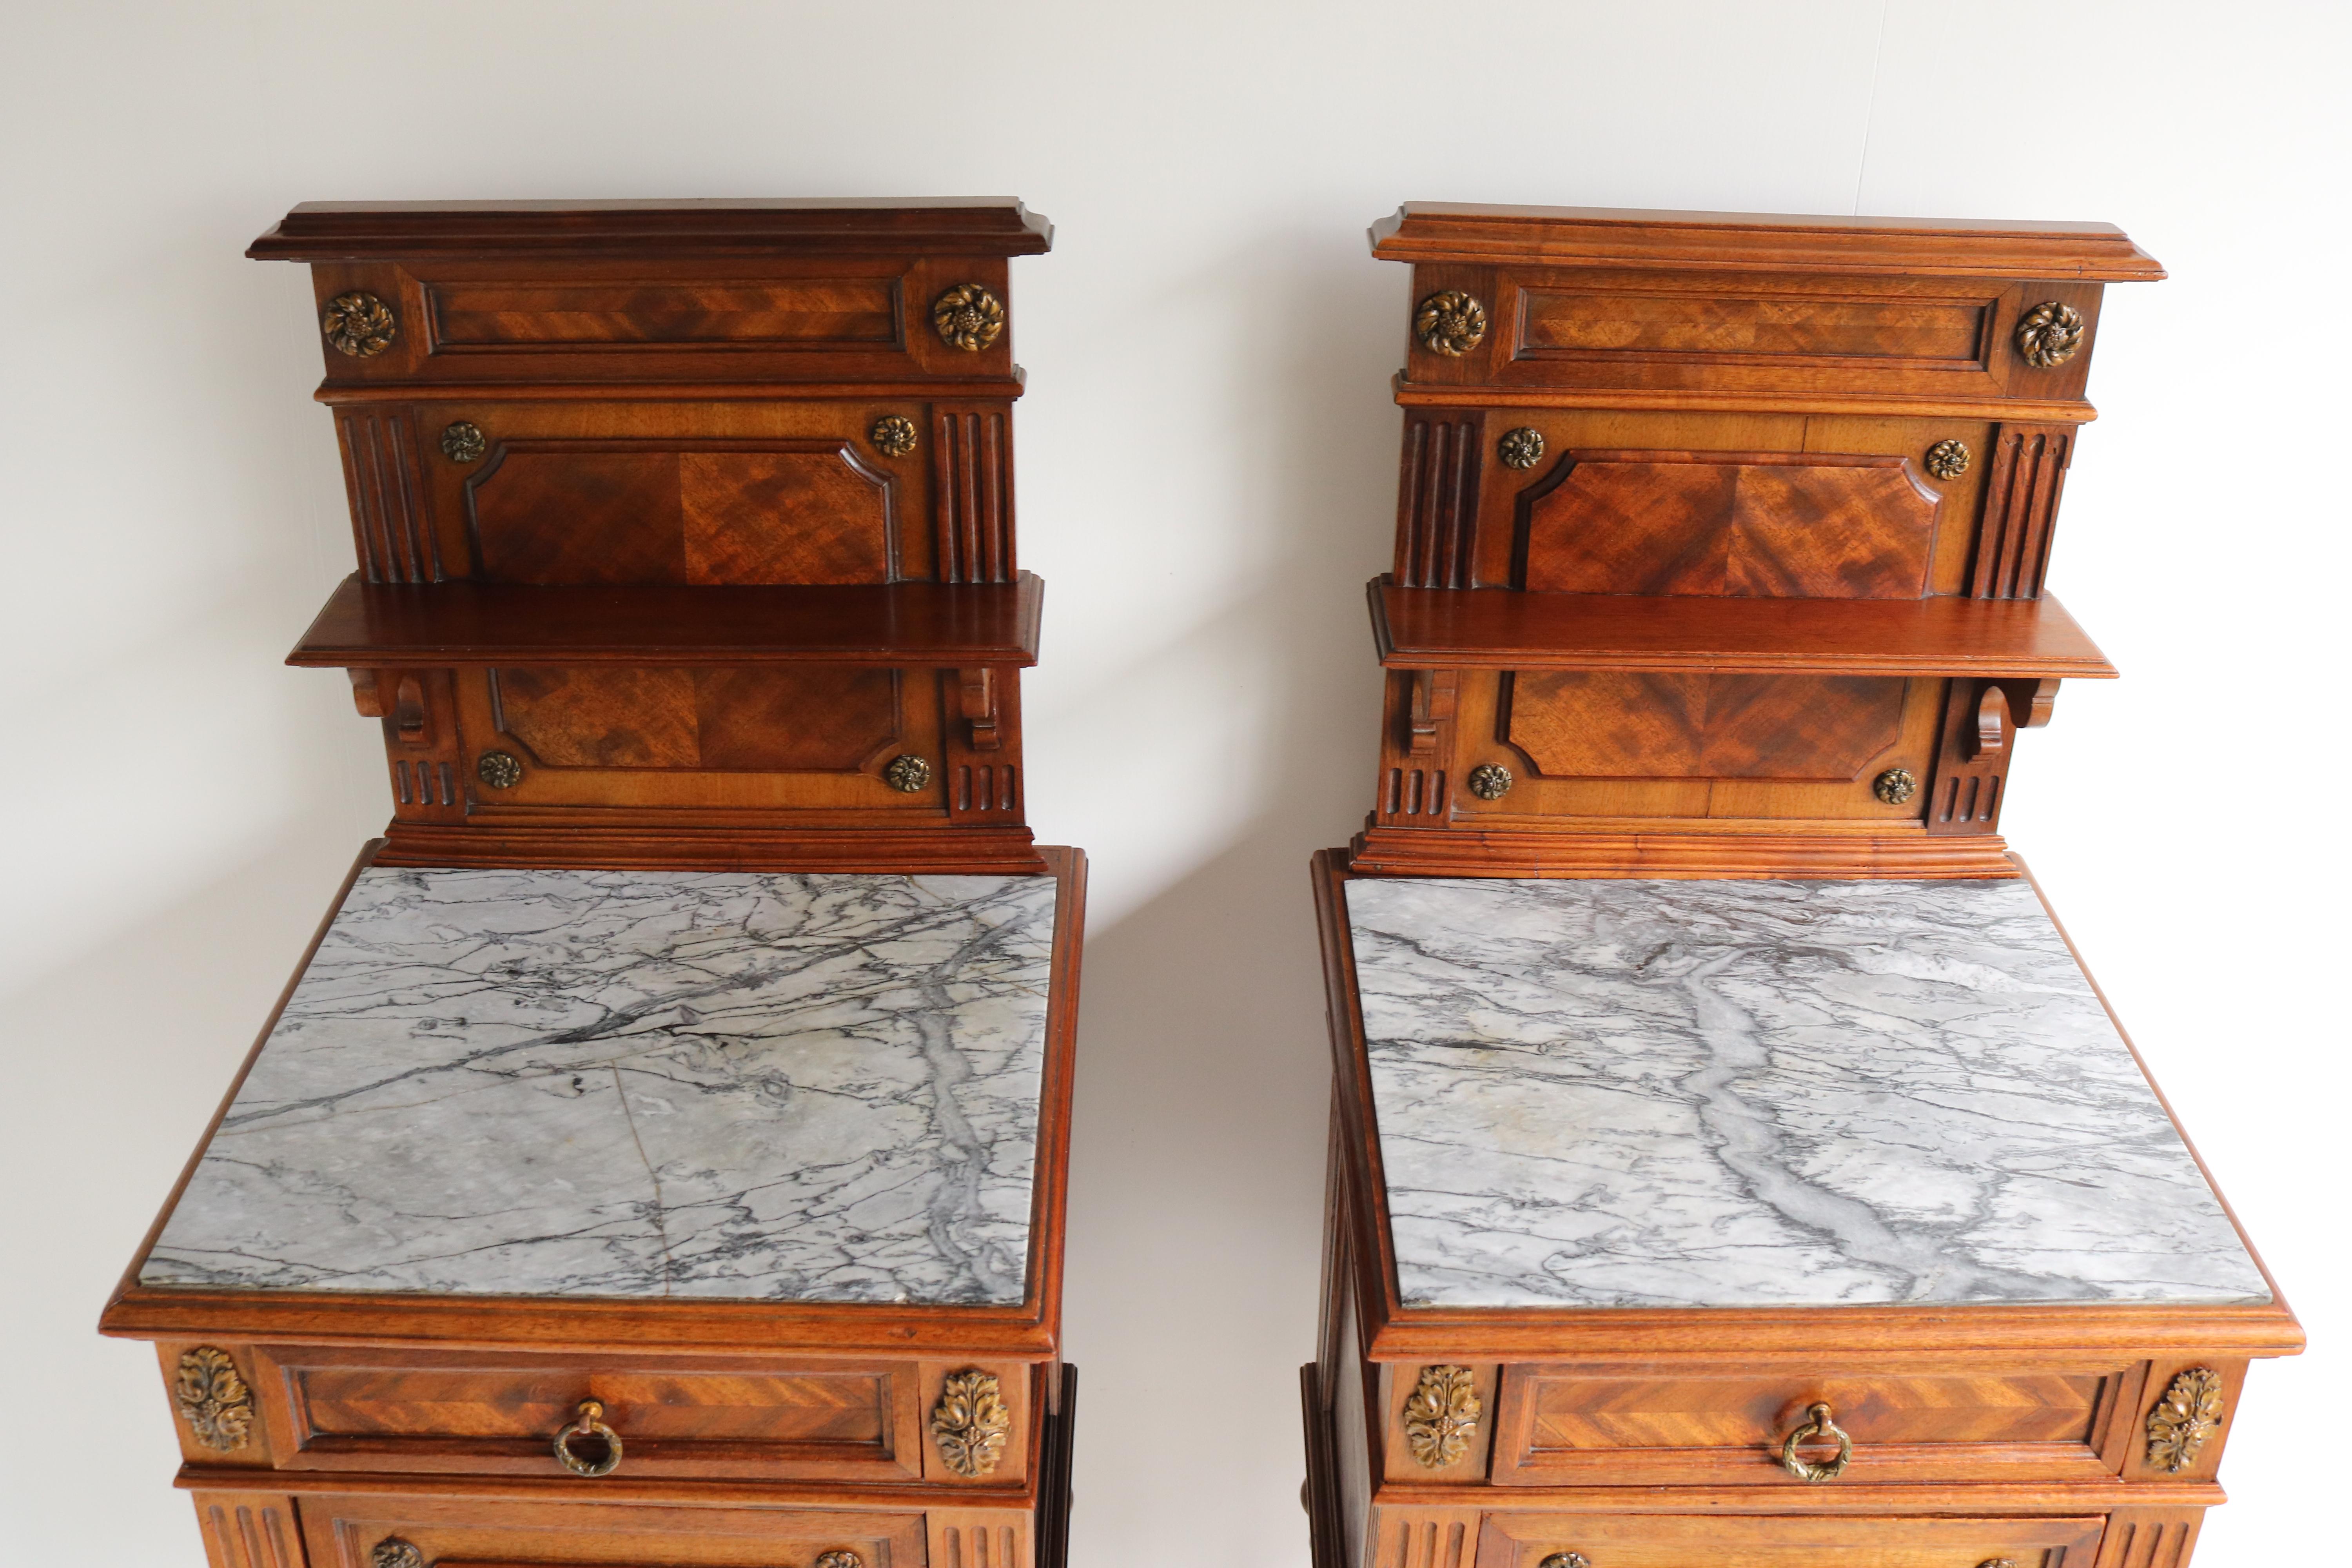 Impressive & stunning ! This pair of antique French 19th century night stands / bedside cabinets in Walnut. 
Amazing quality with inlaid walnut, bronze ornaments & grey marble tops. 
The bronze decorations combined with the walnut inlay and marble